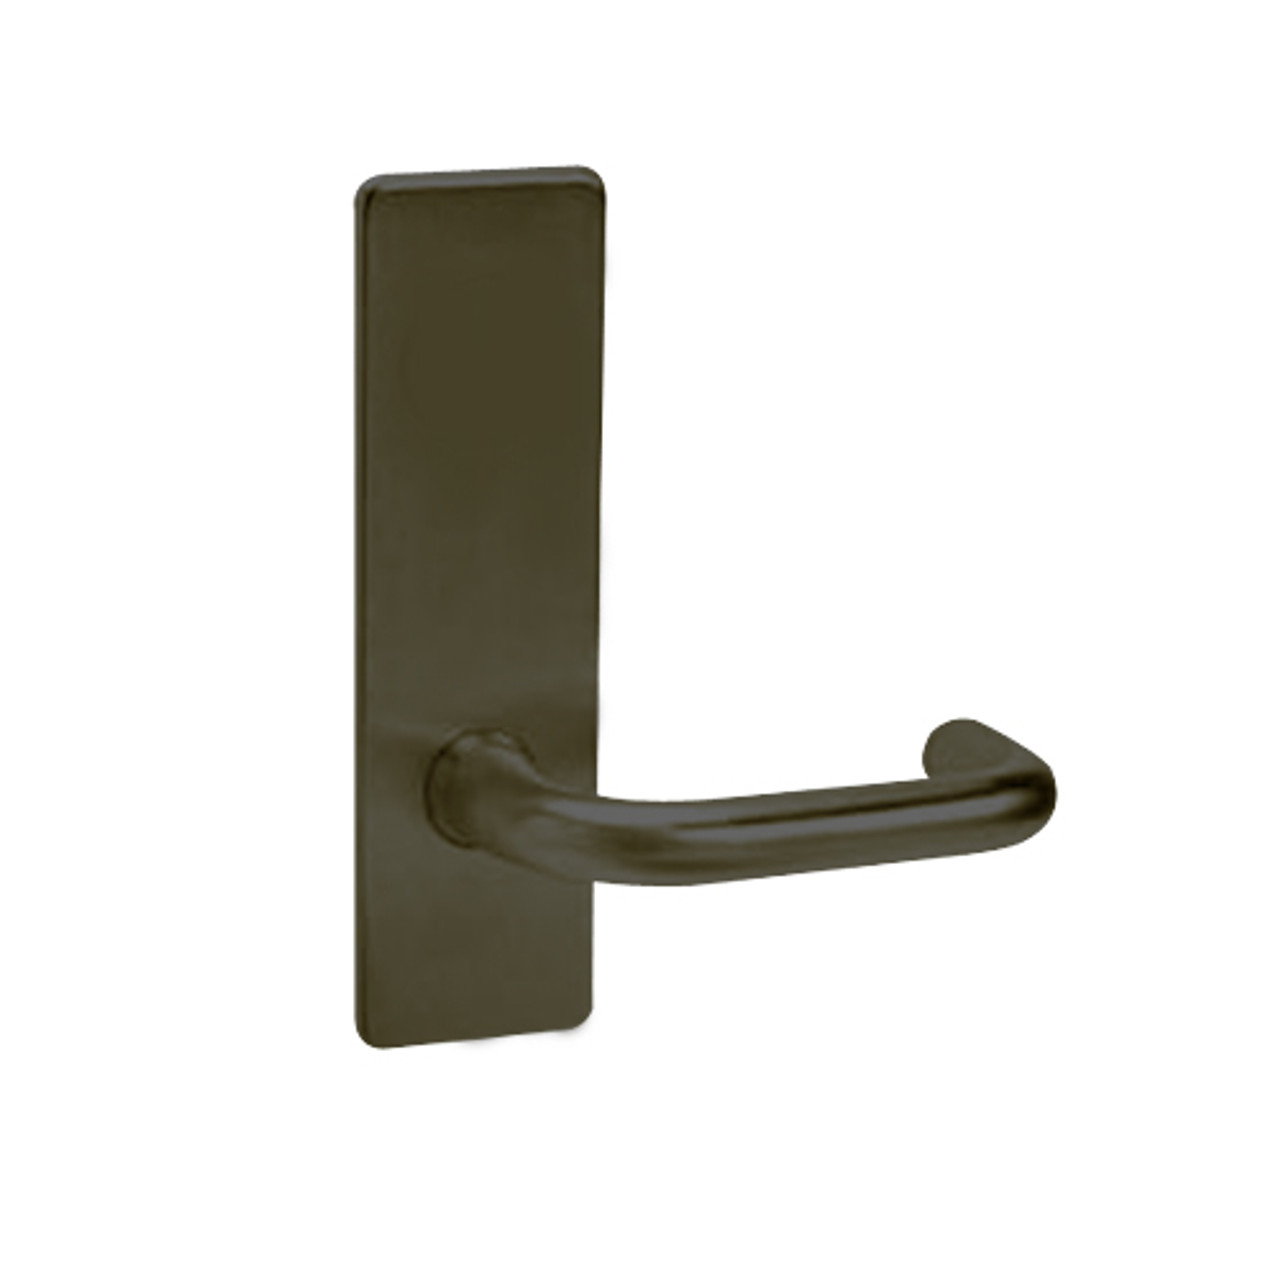 ML2030-LSM-613 Corbin Russwin ML2000 Series Mortise Privacy Locksets with Lustra Lever in Oil Rubbed Bronze